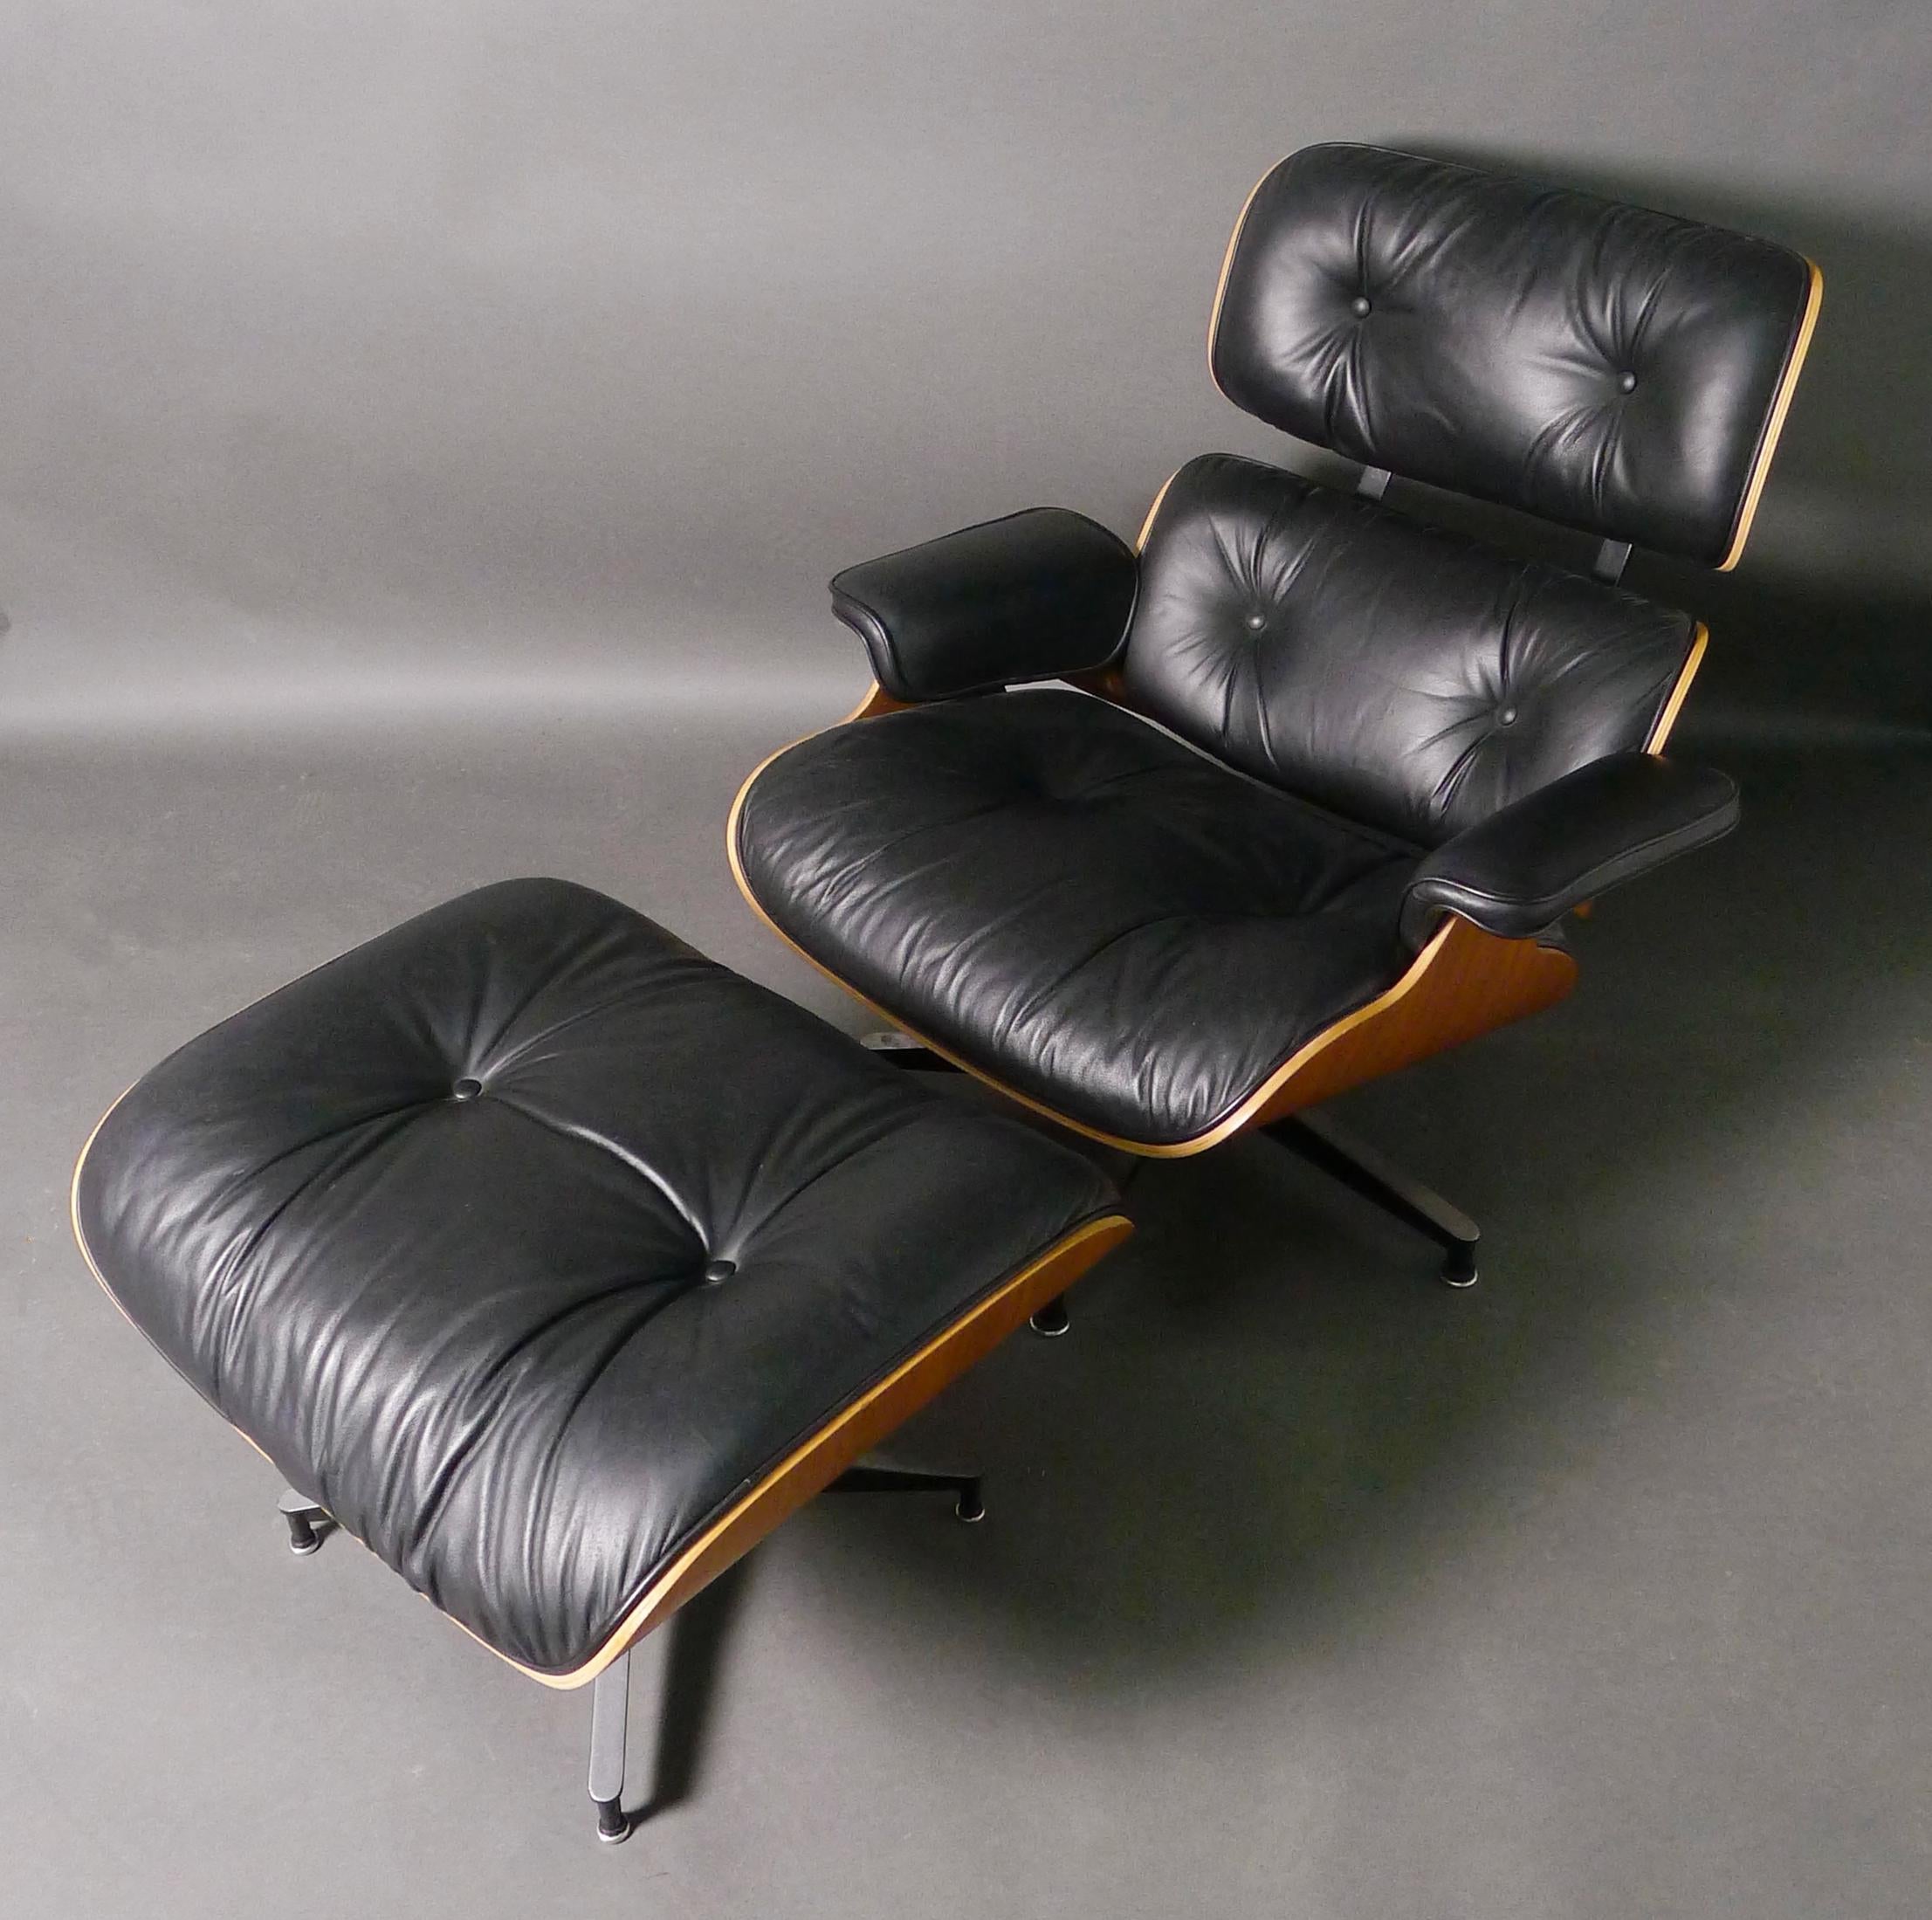 Charles and Ray Eames Lounge Chair and Ottoman, model 670/671 for Herman Miller, USA

Walnut veneer shell with black leather padded and buttoned upholstery. Labels to underside of both pieces.

In good condition, believed to be of 1980s